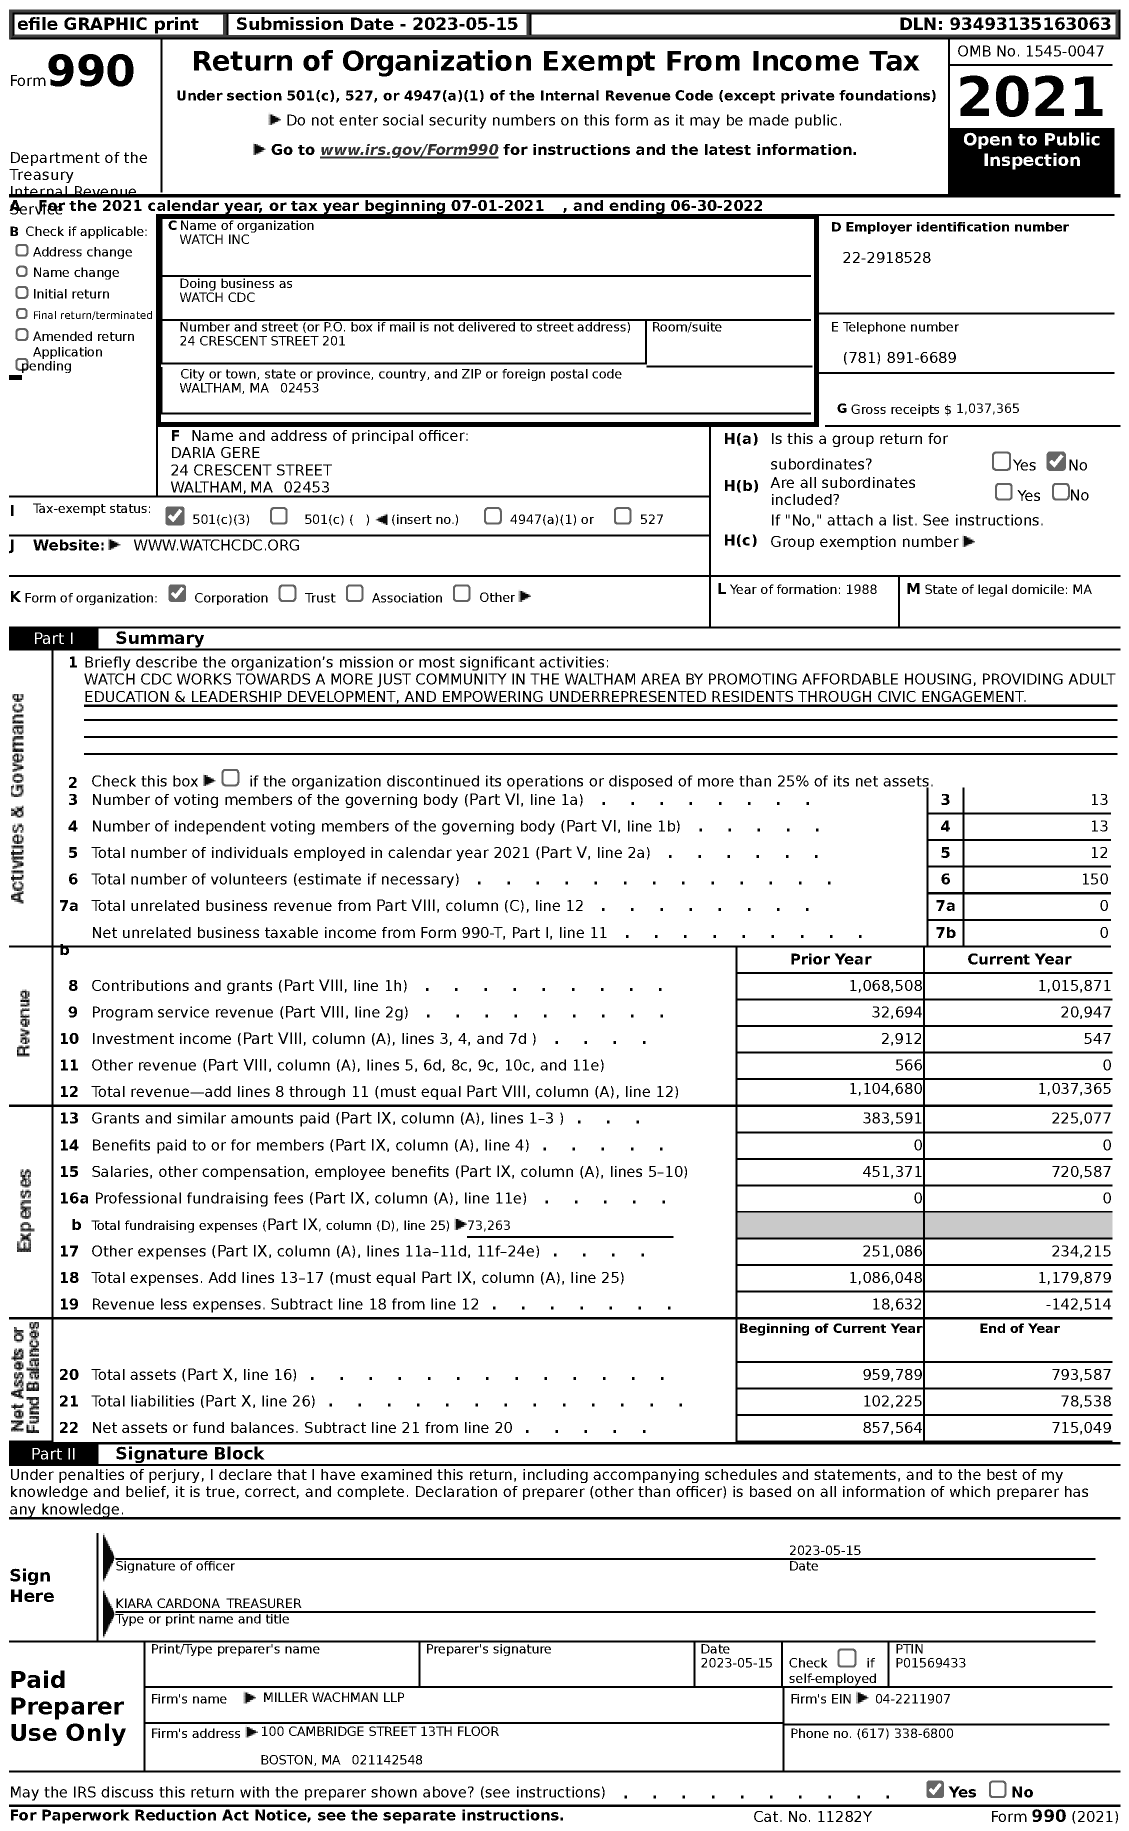 Image of first page of 2021 Form 990 for Watch CDC